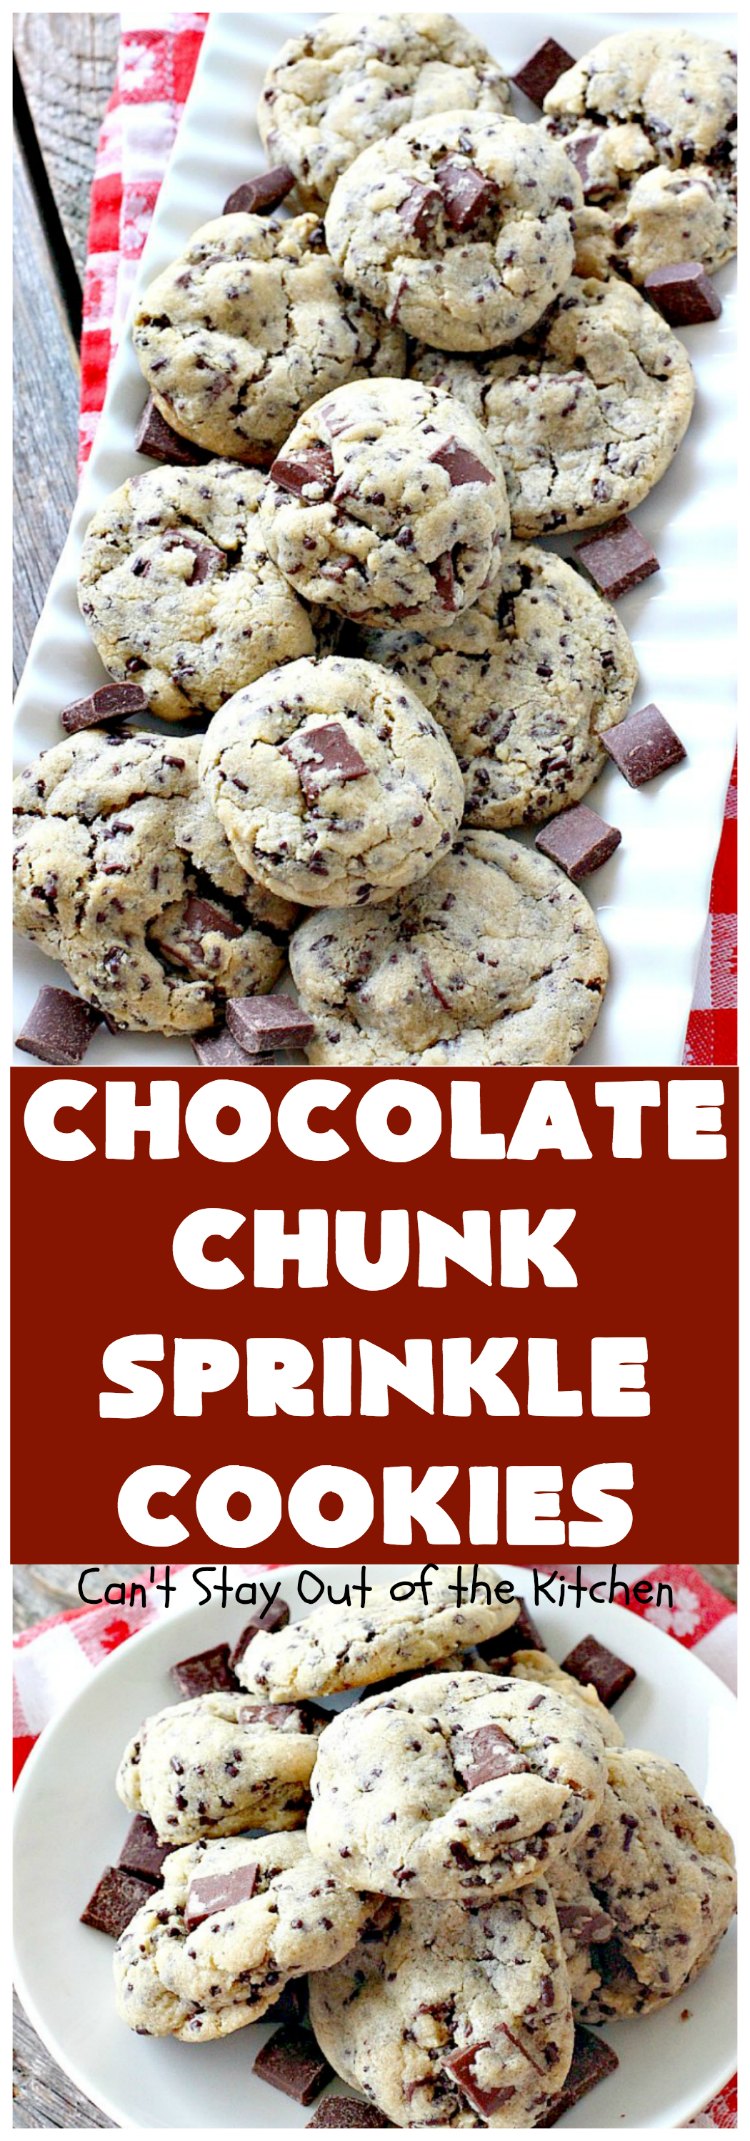 Chocolate Chunk Sprinkle Cookies | Can't Stay Out of the Kitchen